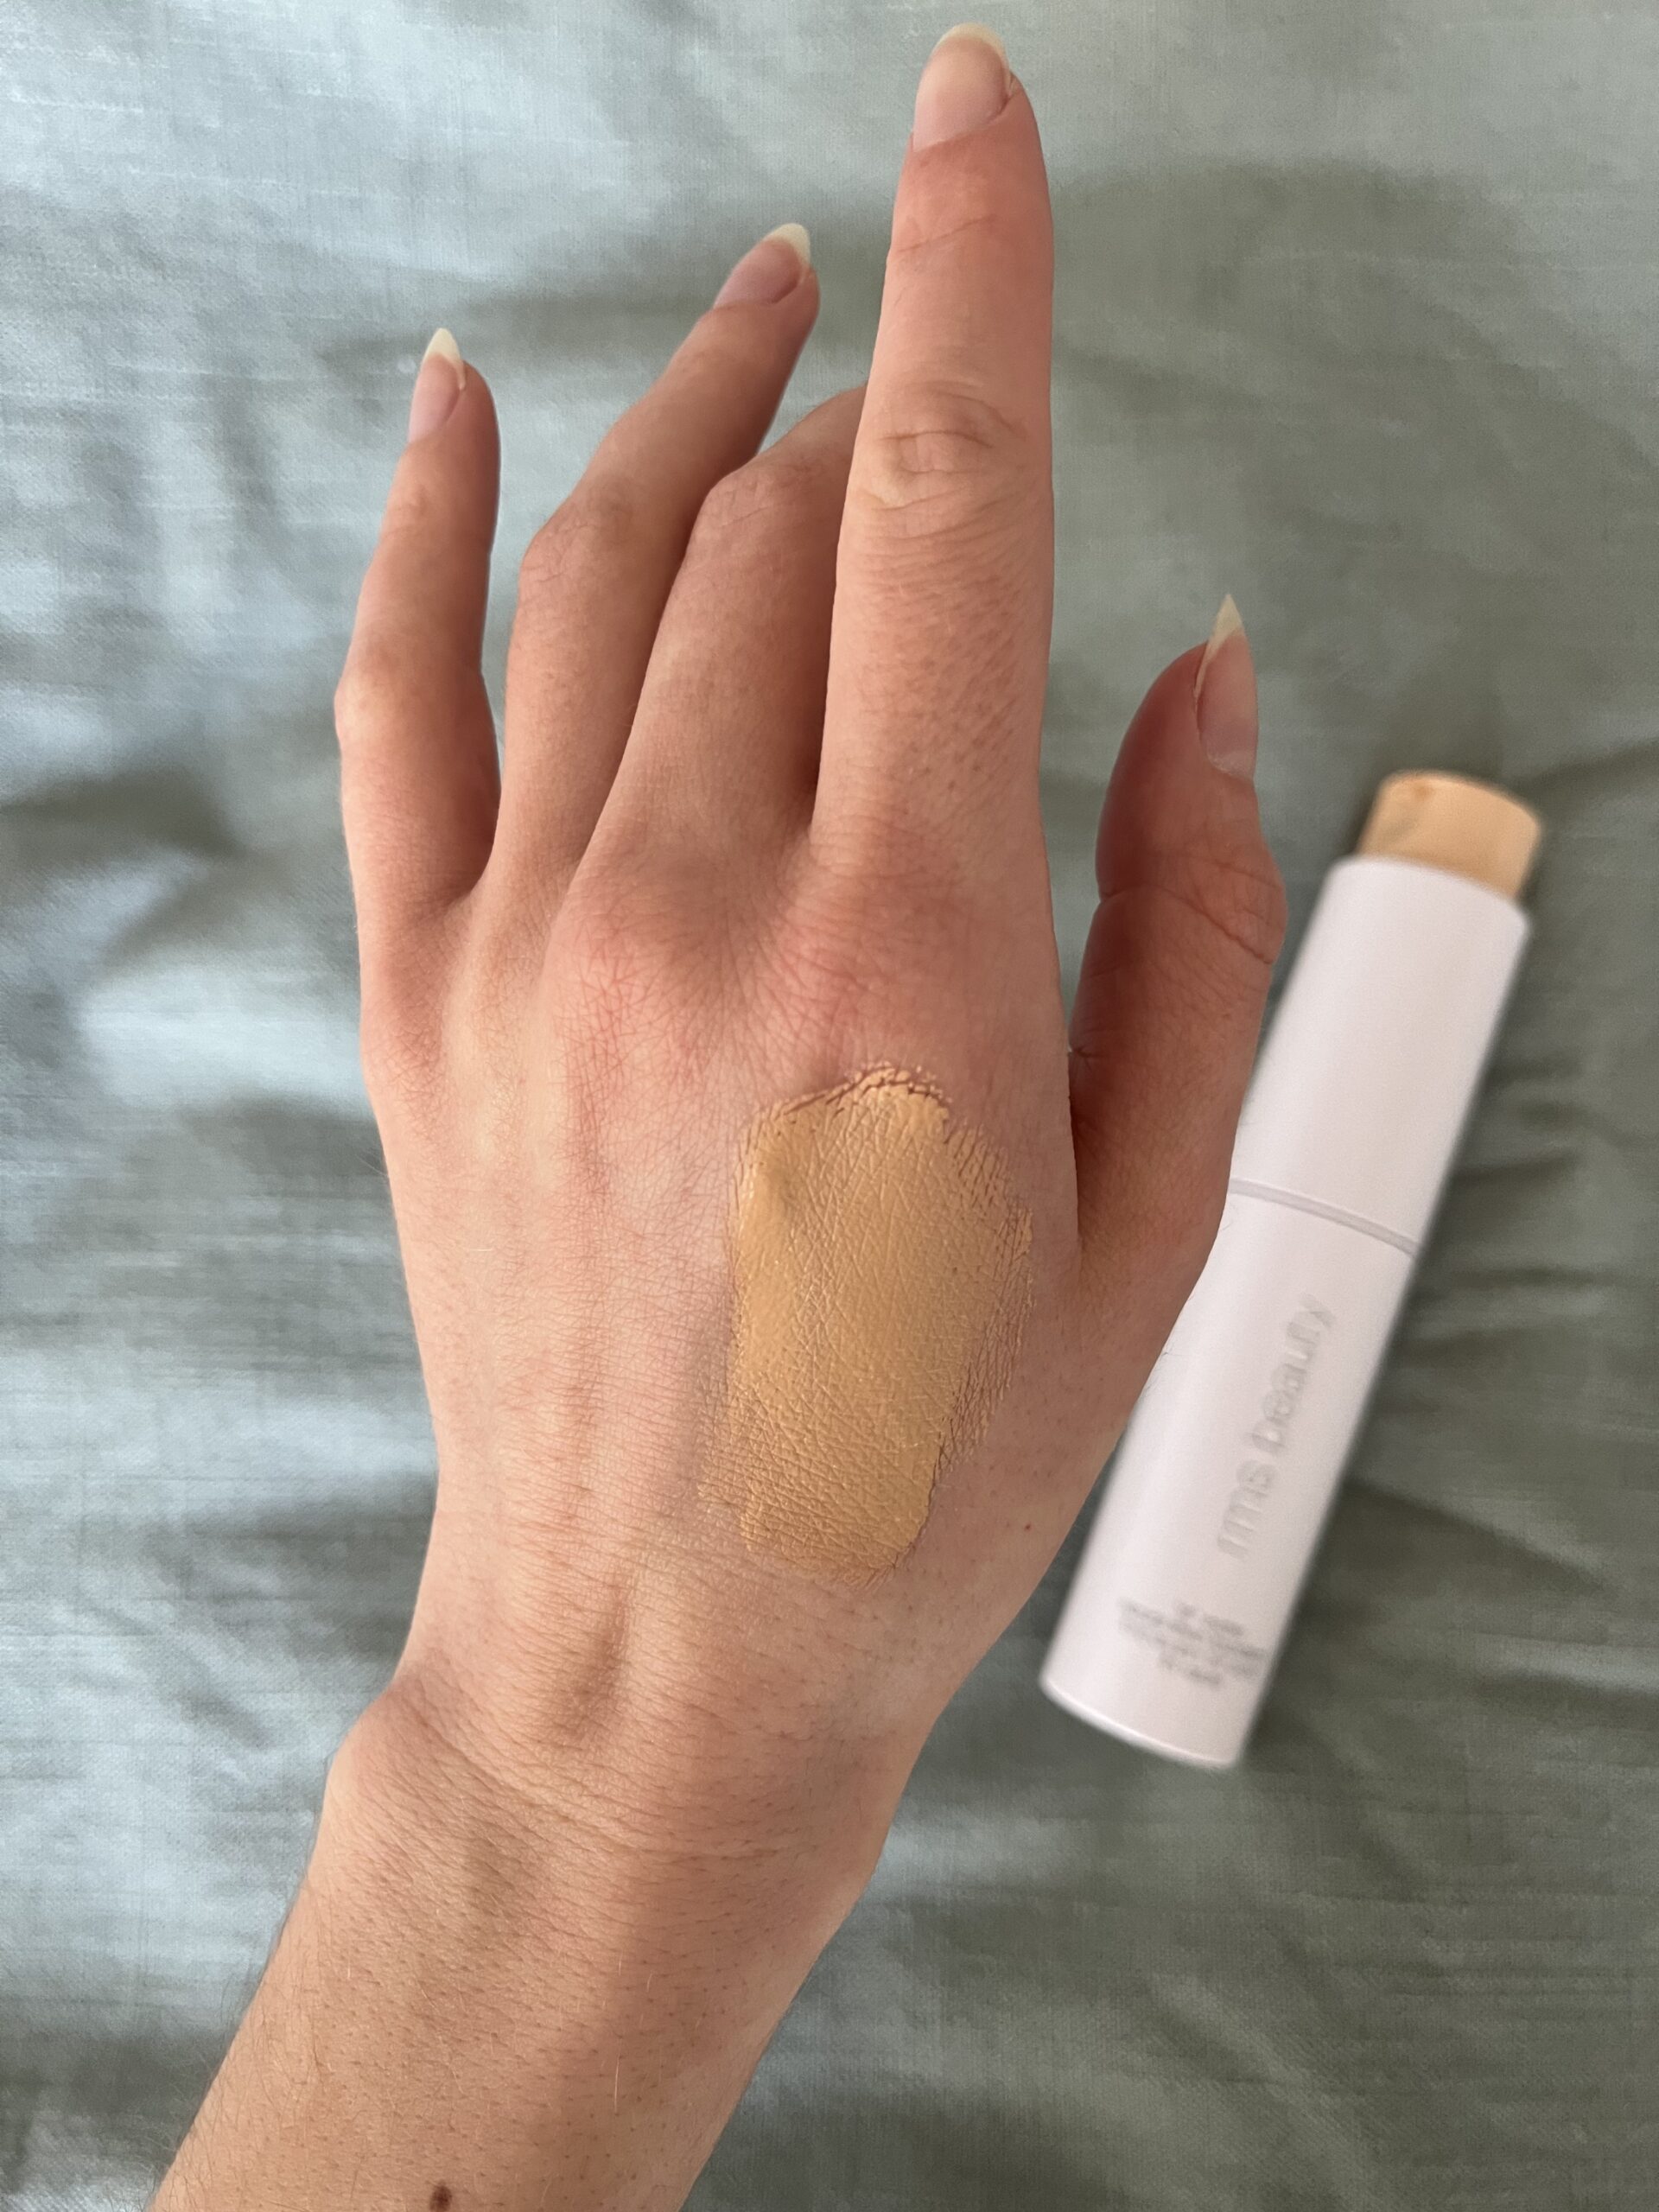 A hand with a swatch of beige foundation on the back, next to a tube of foundation with a white cap.